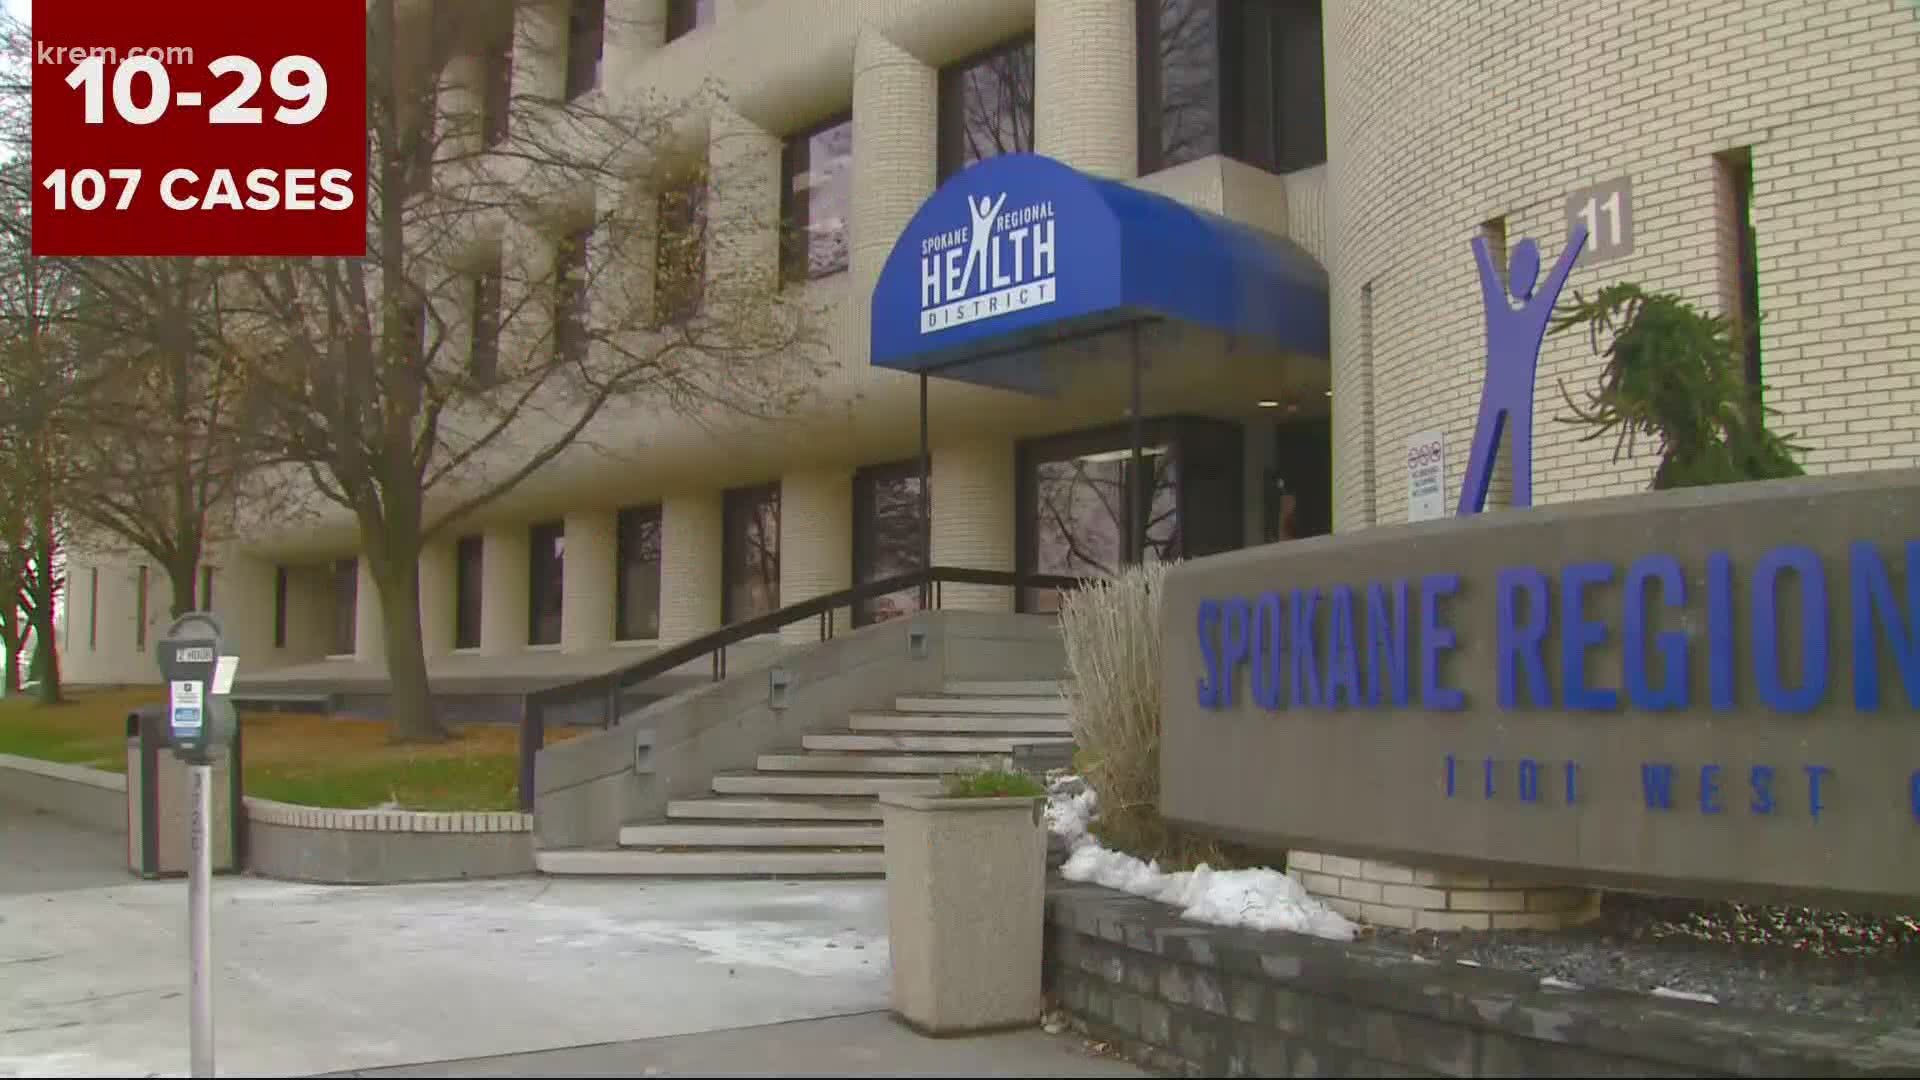 Spokane's health officer was fired just as the county began shattering records for the spread of the coronavirus.